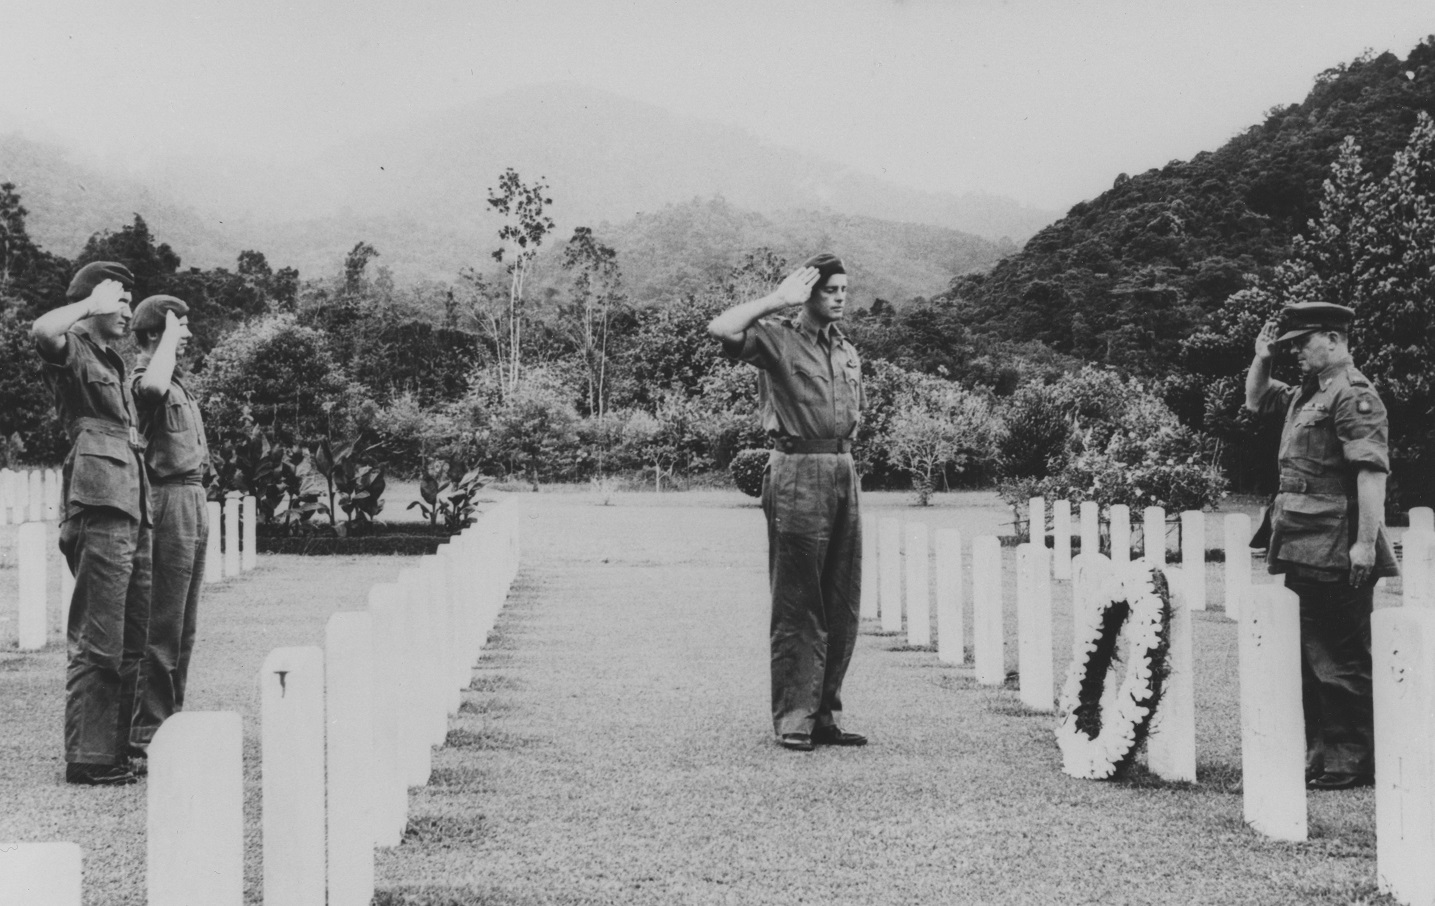 Black and white image shows RAF personnel saluting a wreath and gravestones in a cemetery.